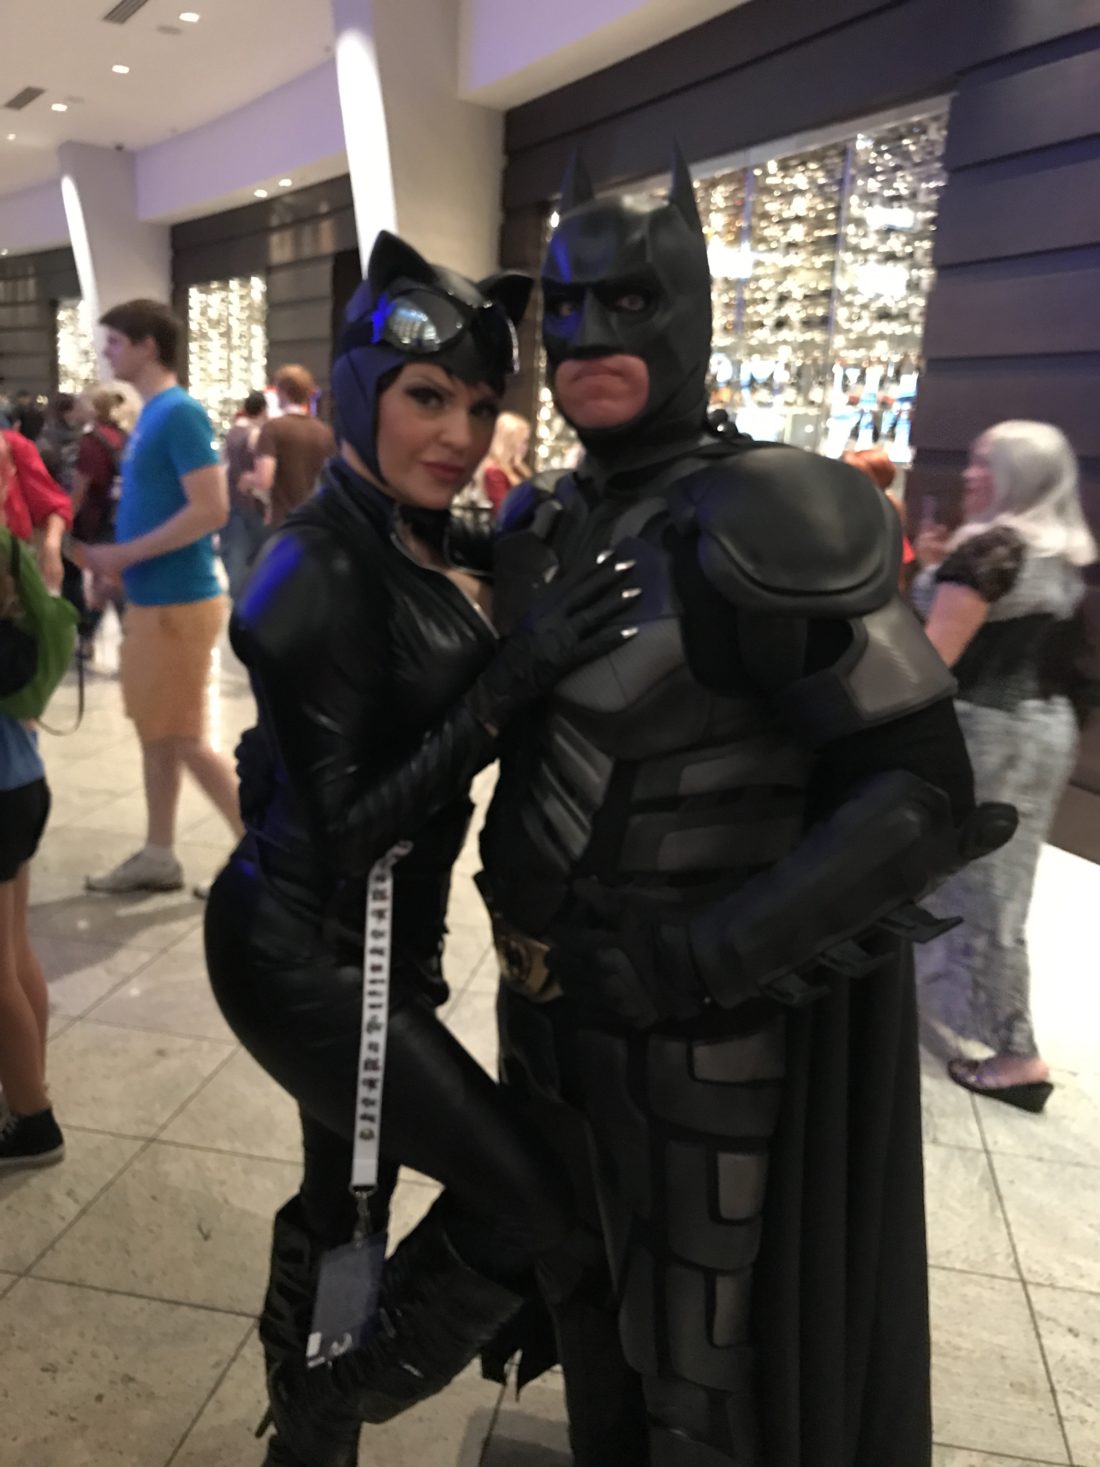 Dragon Con 17′ CosViews: THE DC POWER COUPLE showed up all they way From Gotham to attend DRAGON CON :: A Throw BacK Thread